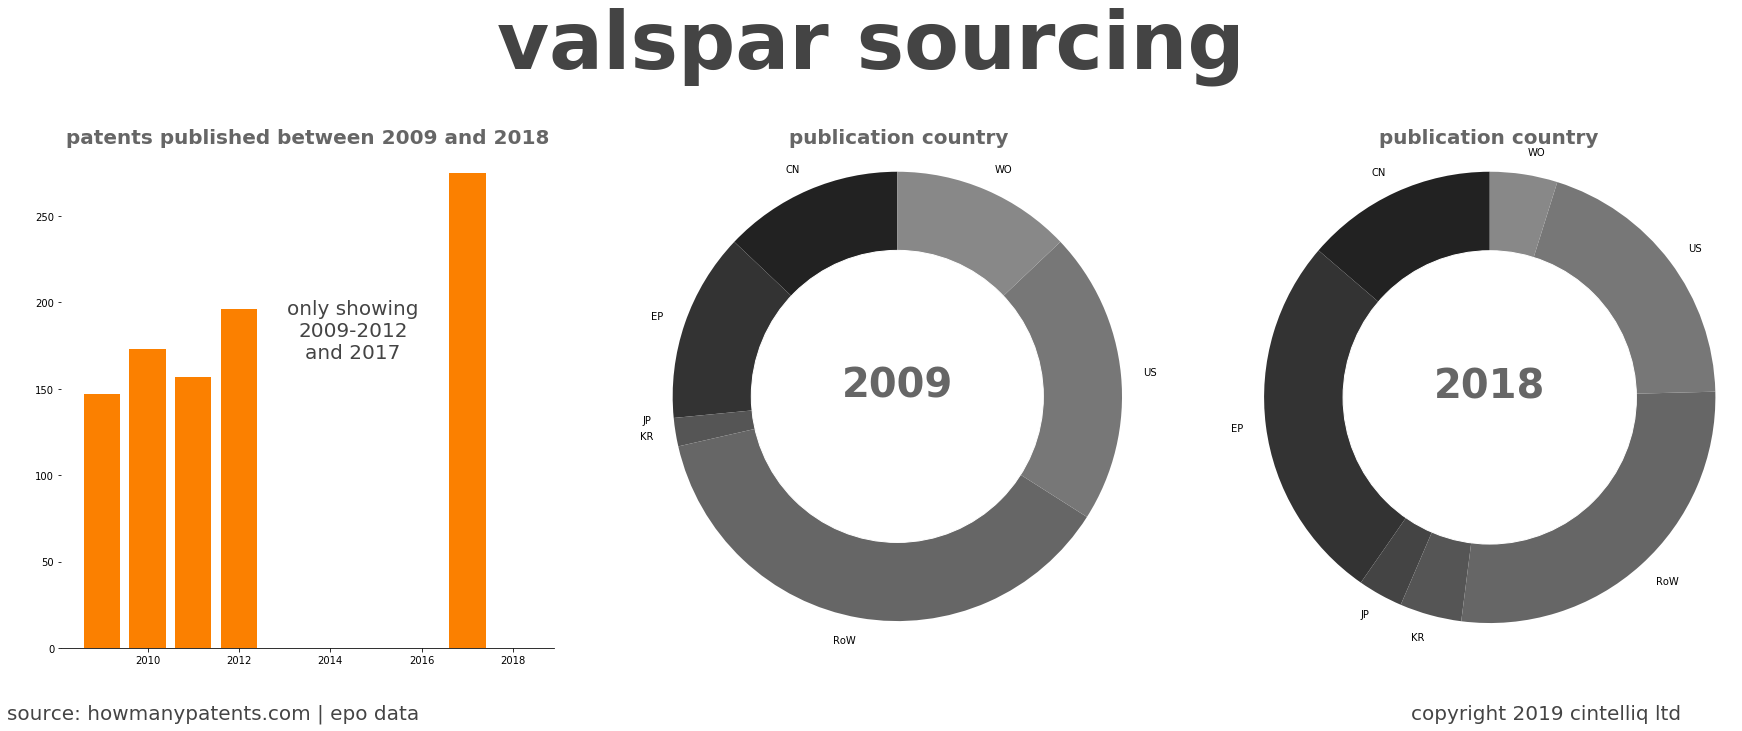 summary of patents for Valspar Sourcing